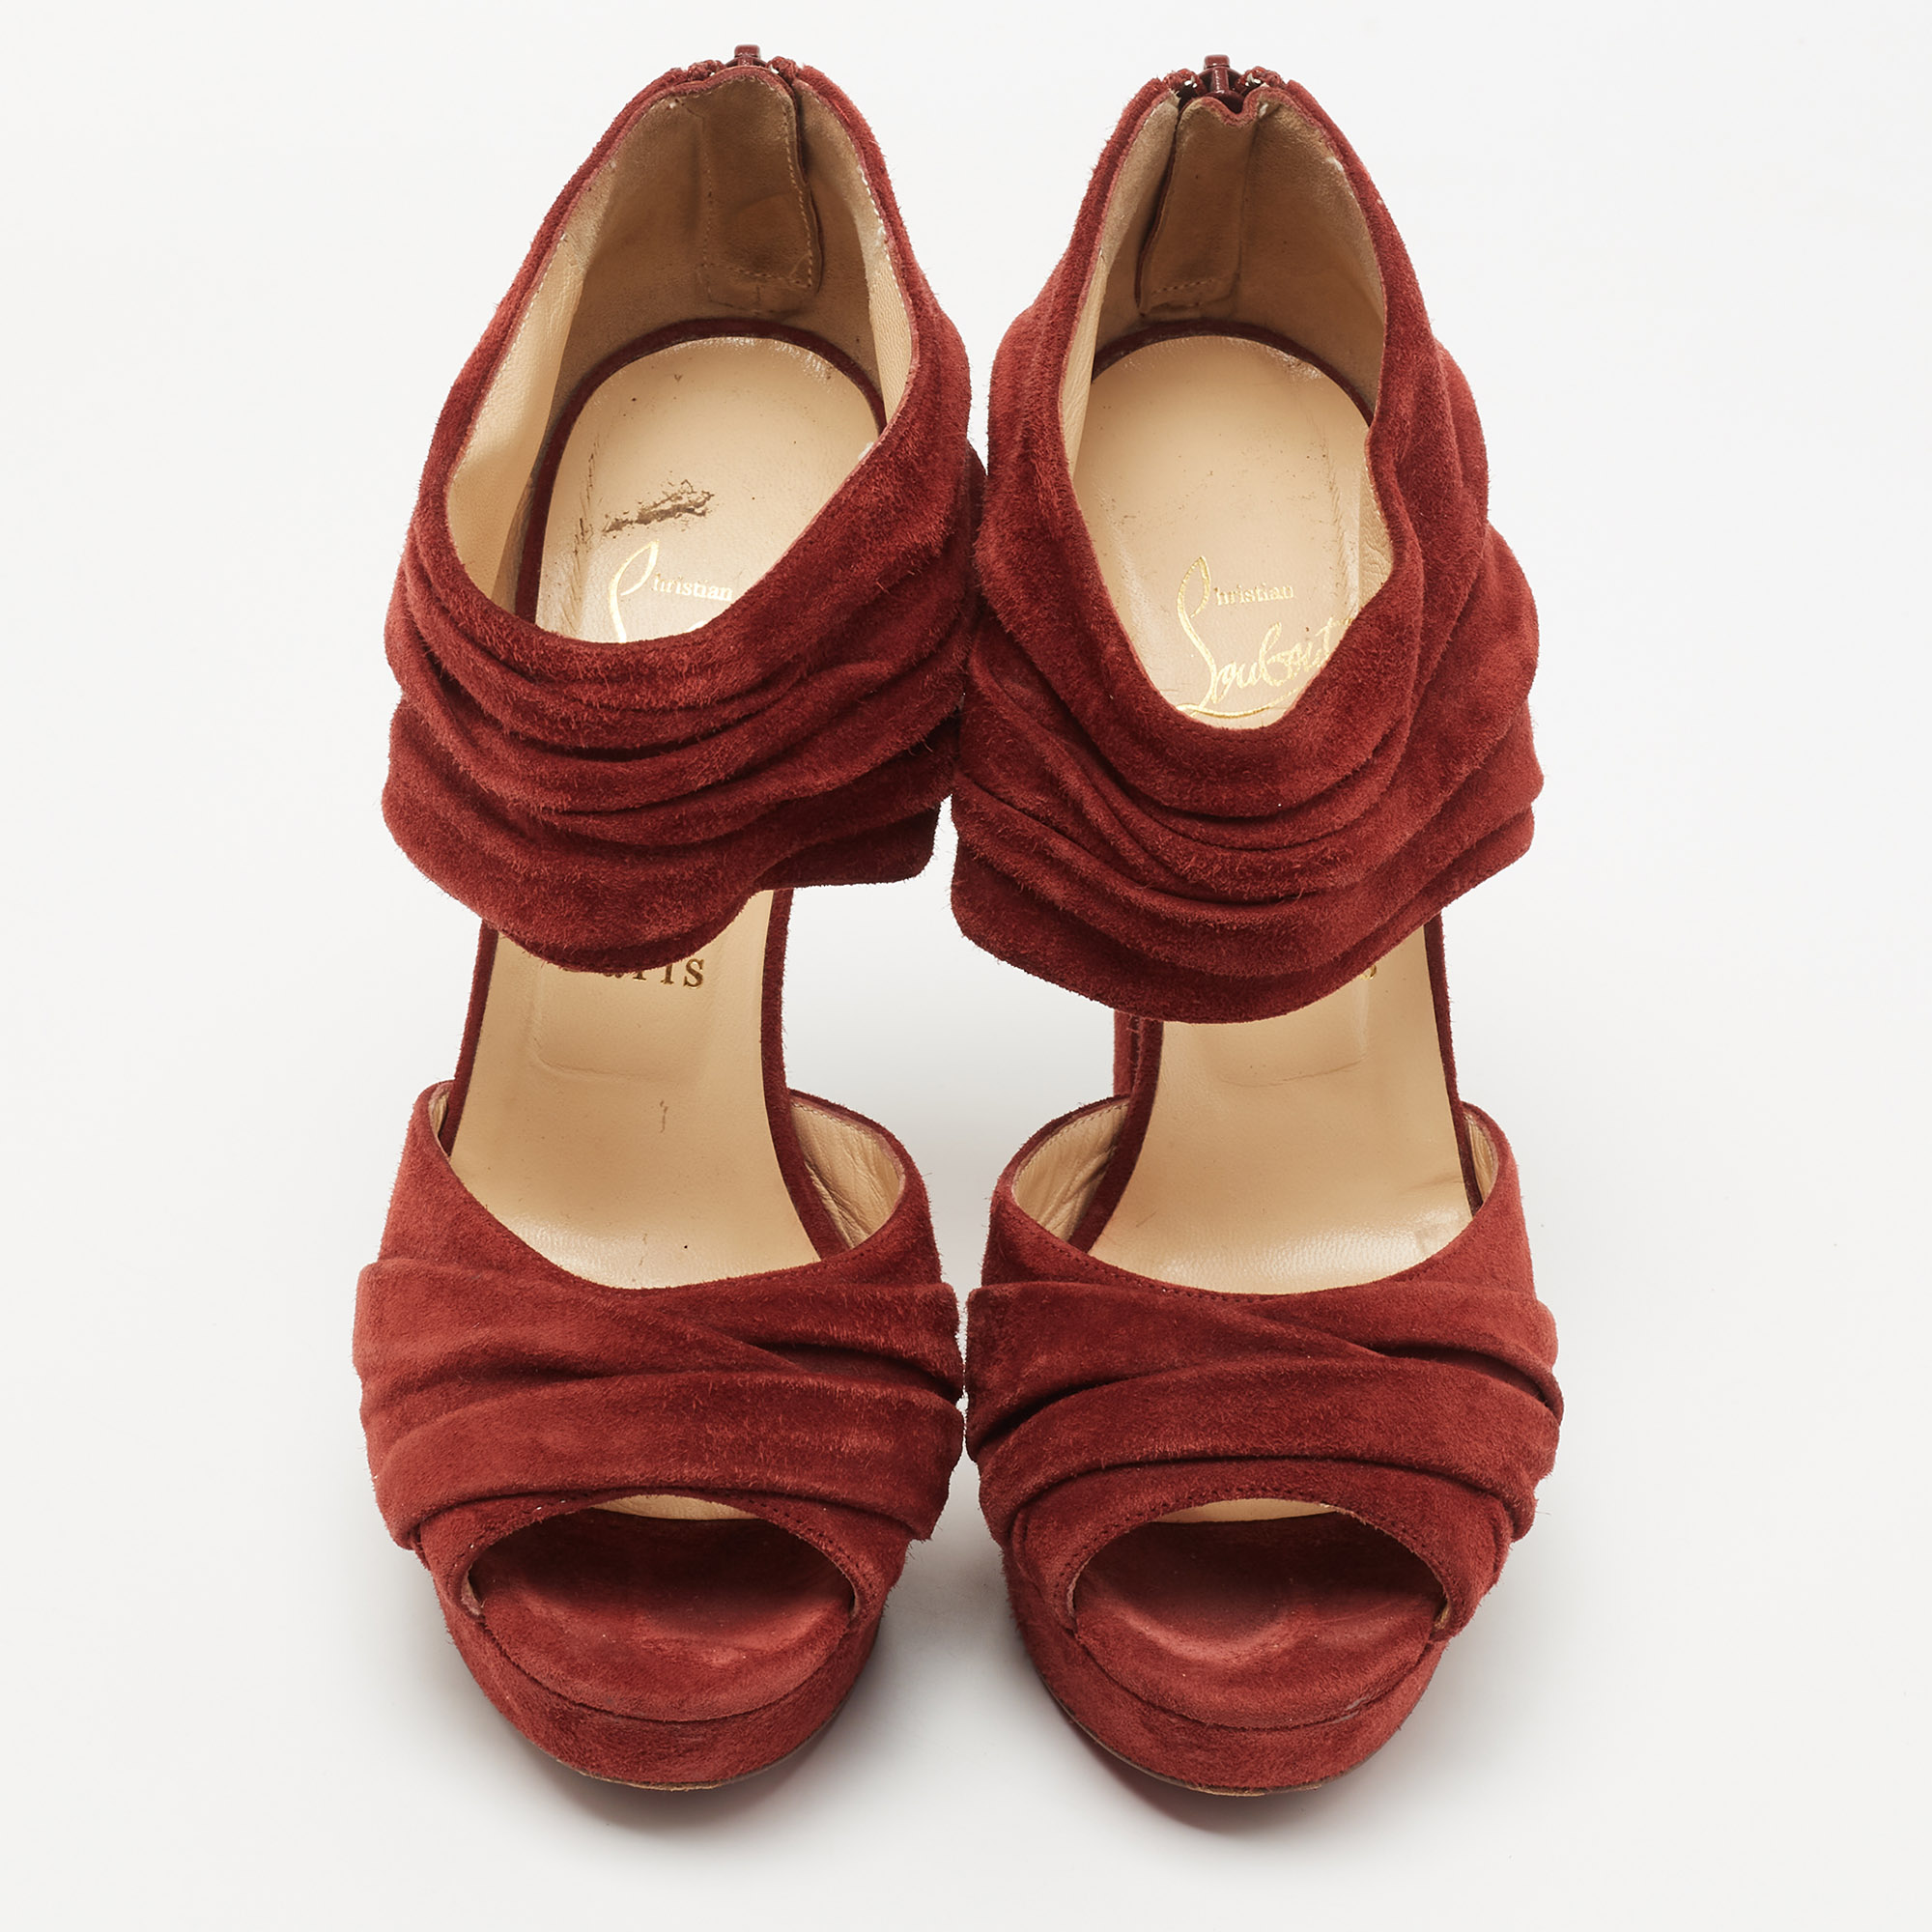 Christian Louboutin Rust Red Suede Pleated Bandra Zip Platform Sandals Size 37